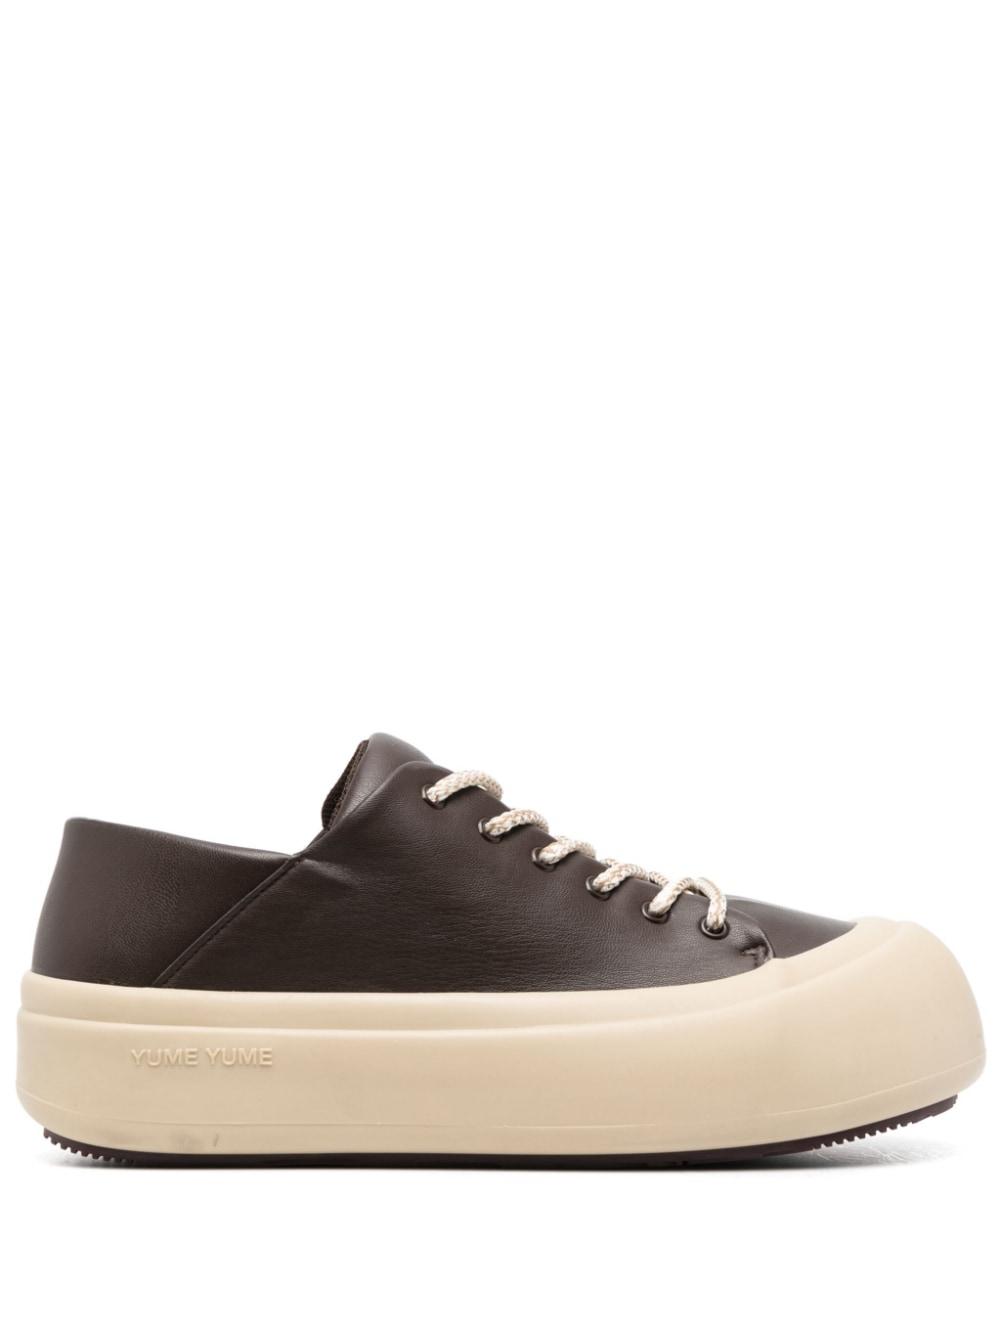 Yume Yume Goofy Flatform Trainers in Brown for Men | Lyst